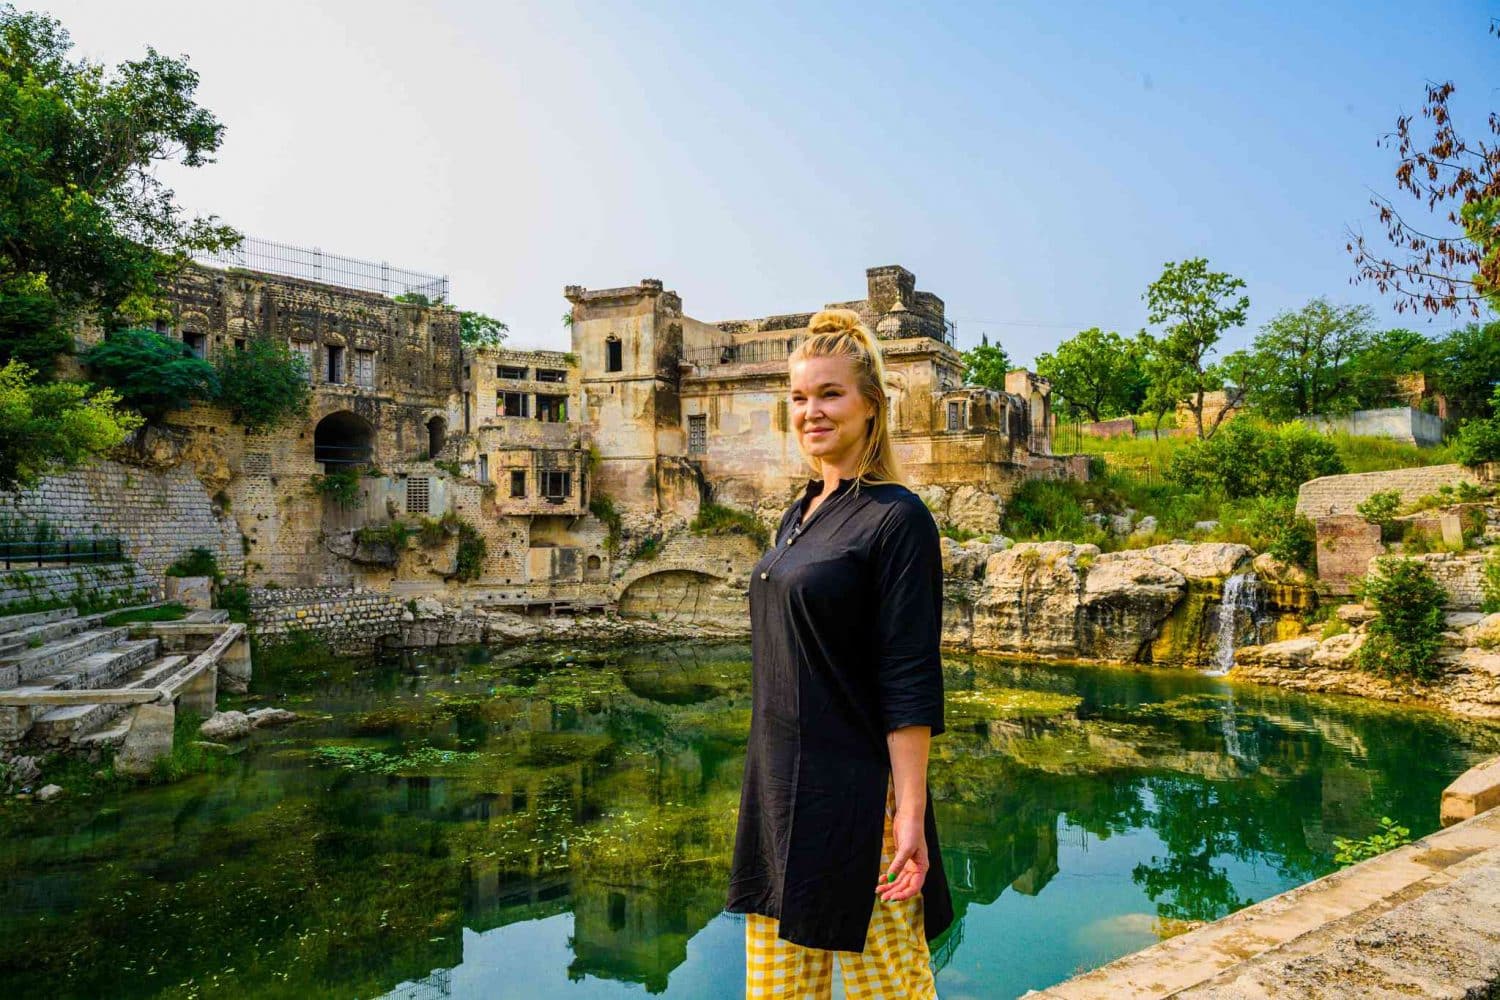 Photo of our friend in front of Katas Raj in Pakistan